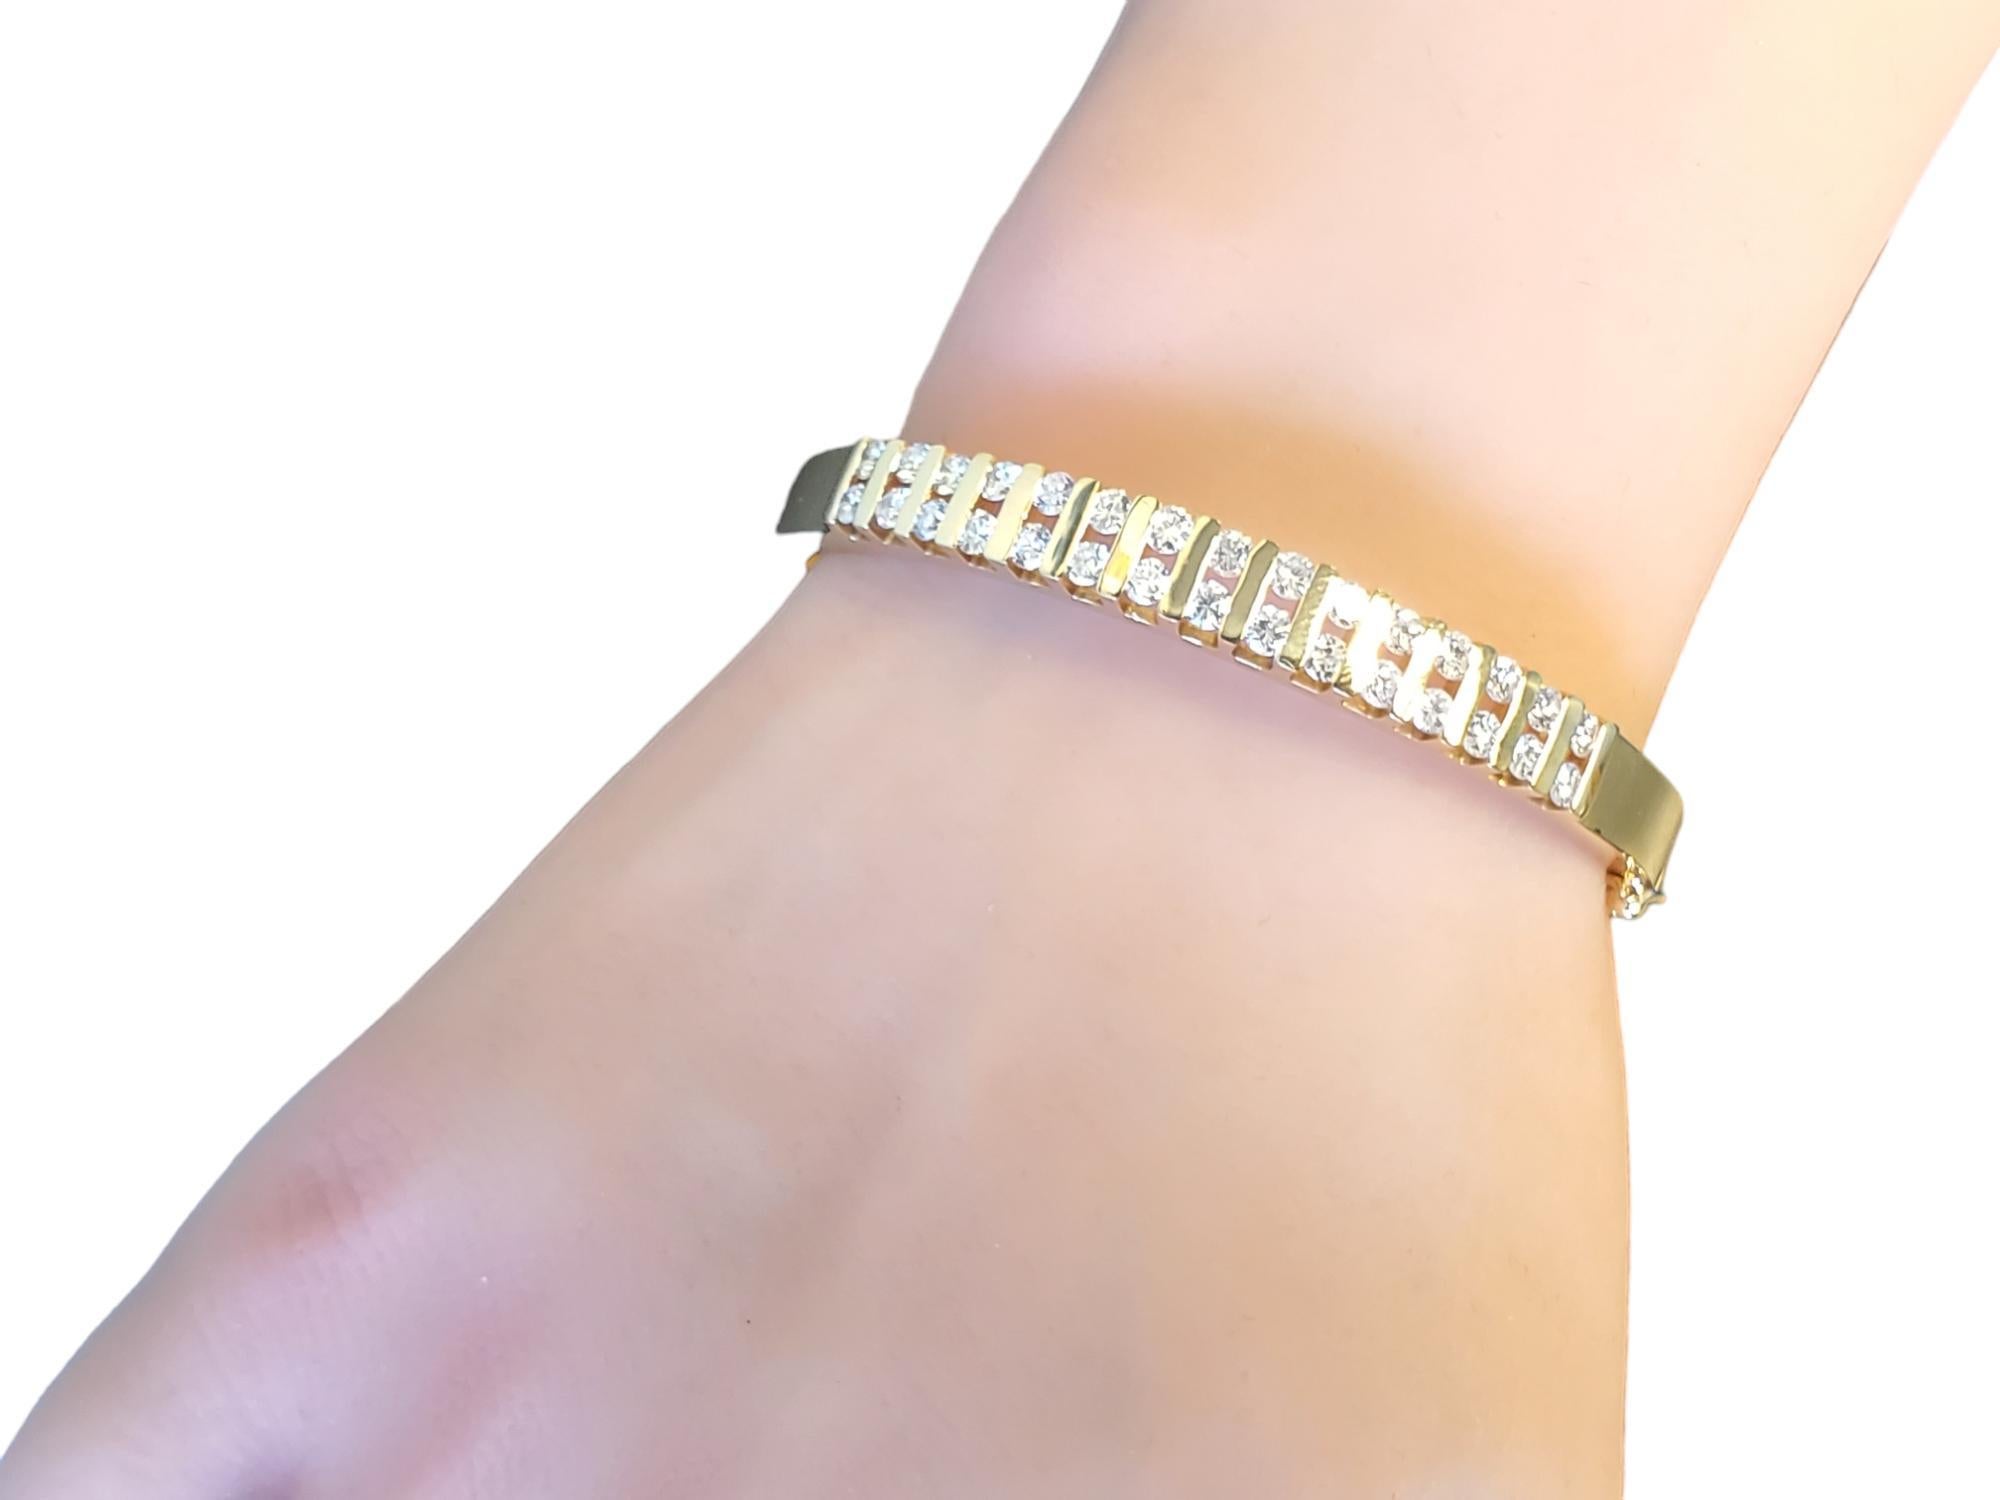 Listed is a 14k yellow gold estate diamond bangle. The bangle is in great condition, It features 30 round brilliant diamonds and is approximately 2.50tcw. The diamonds are I-J in color and VS-SI1, very nice stones. The clasp engages tightly and has